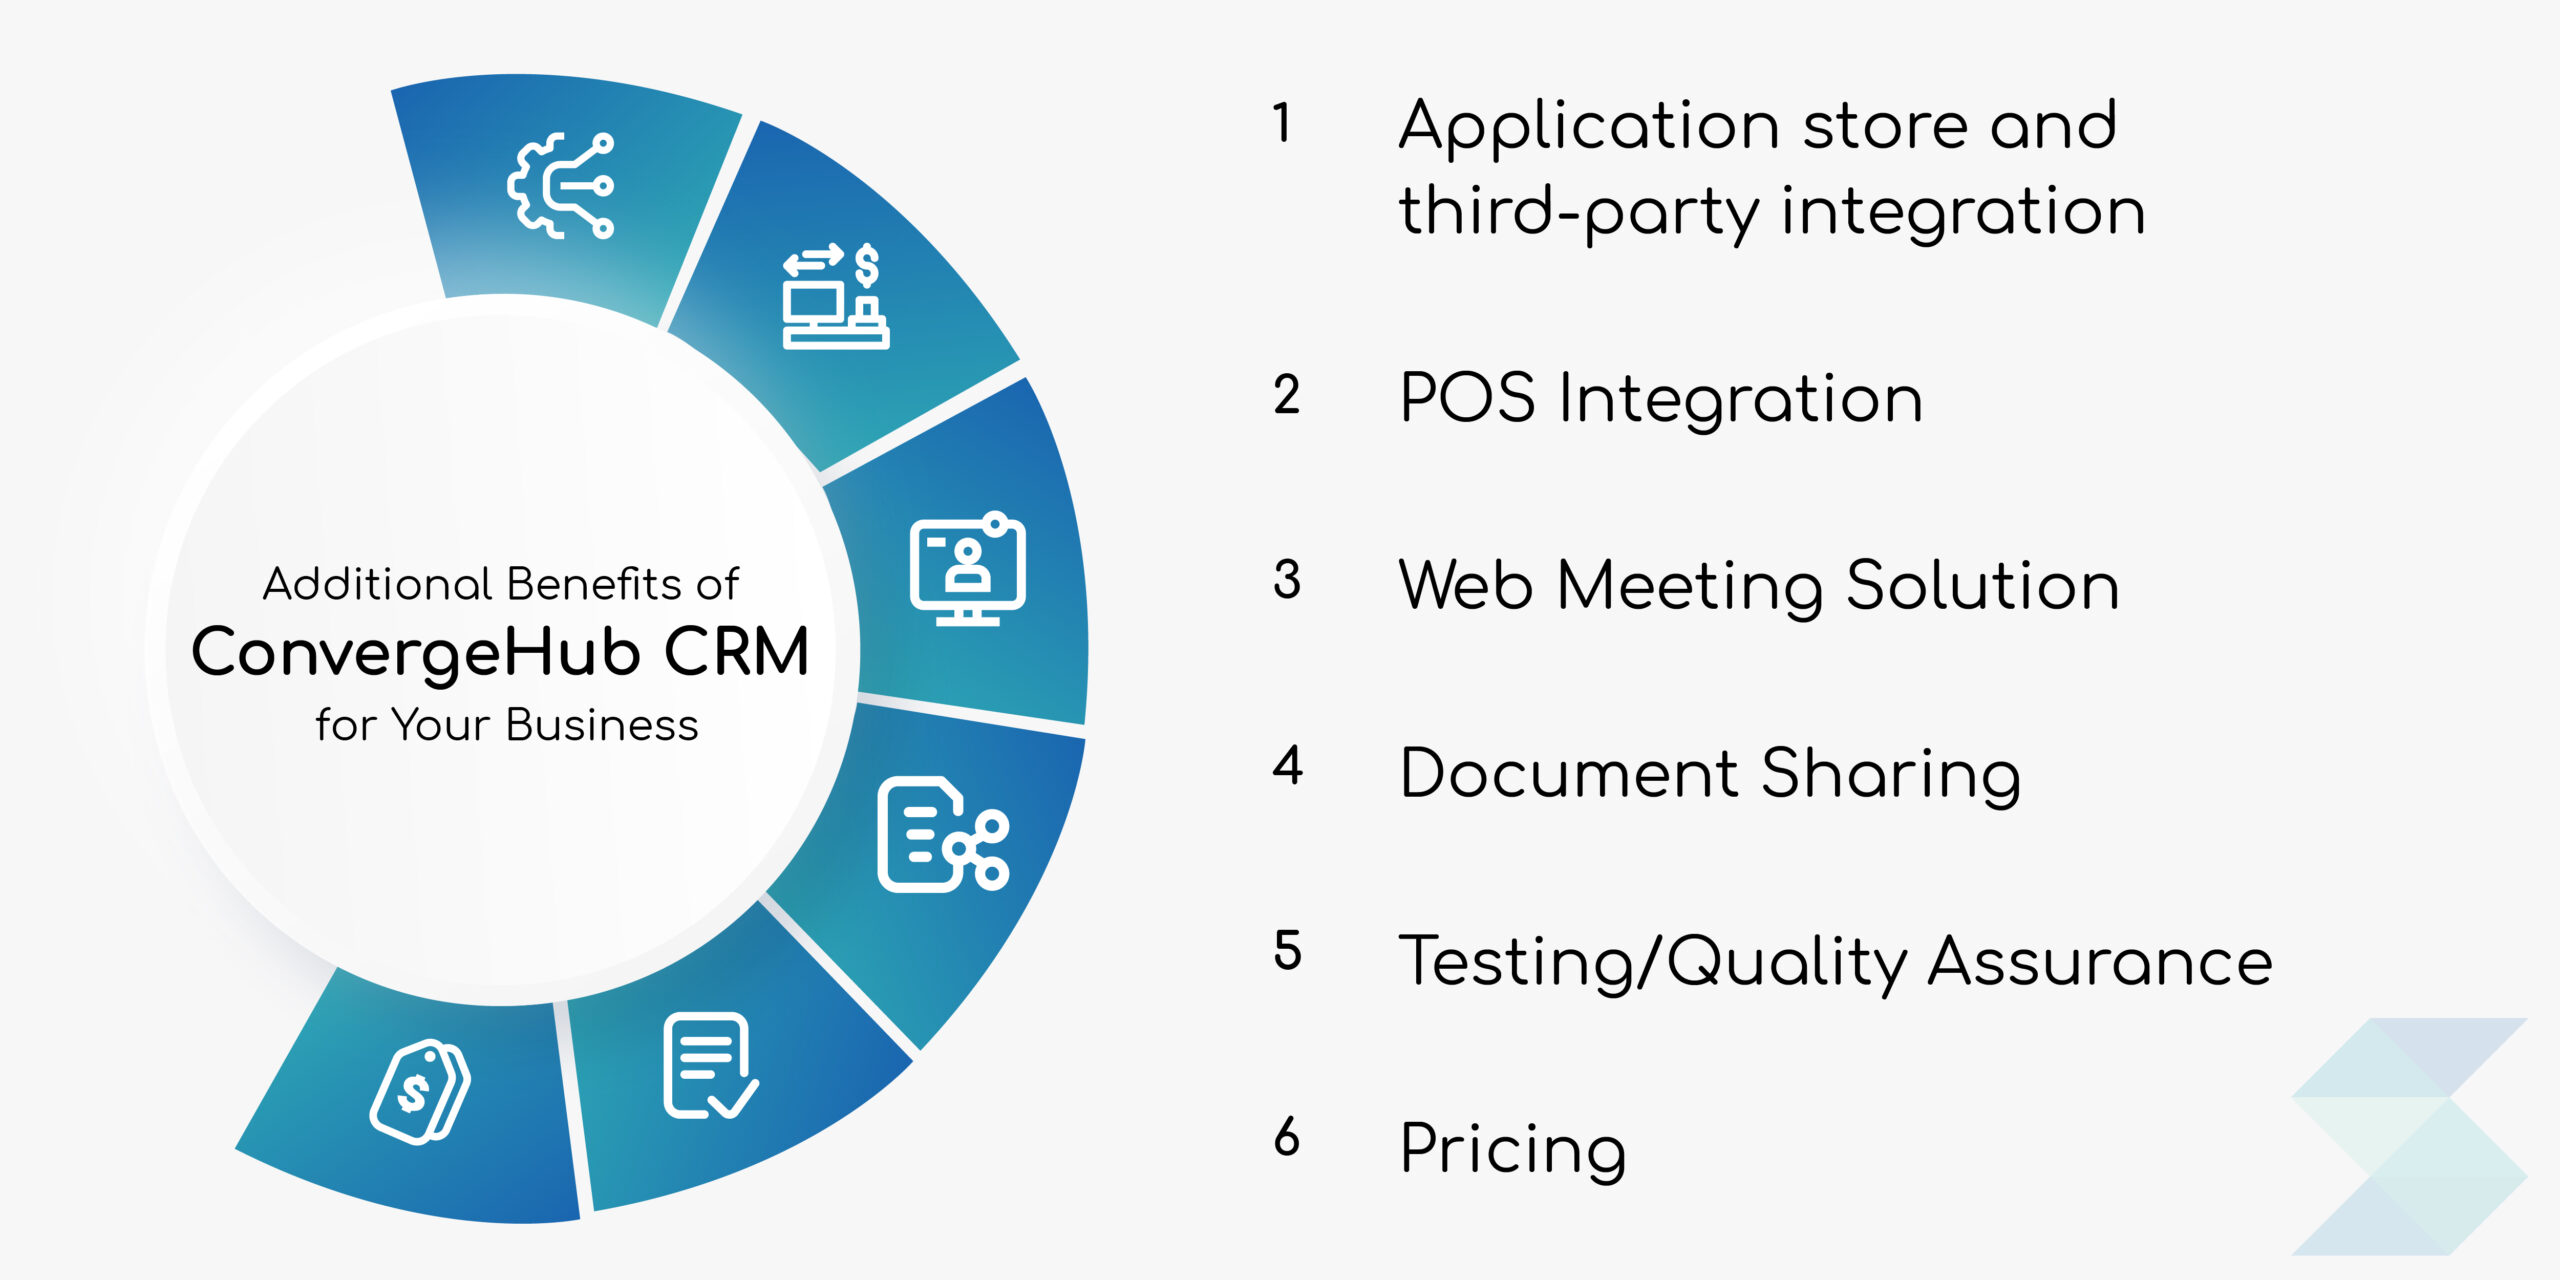 Additional Benefits of ConvergeHub CRM for Your Business